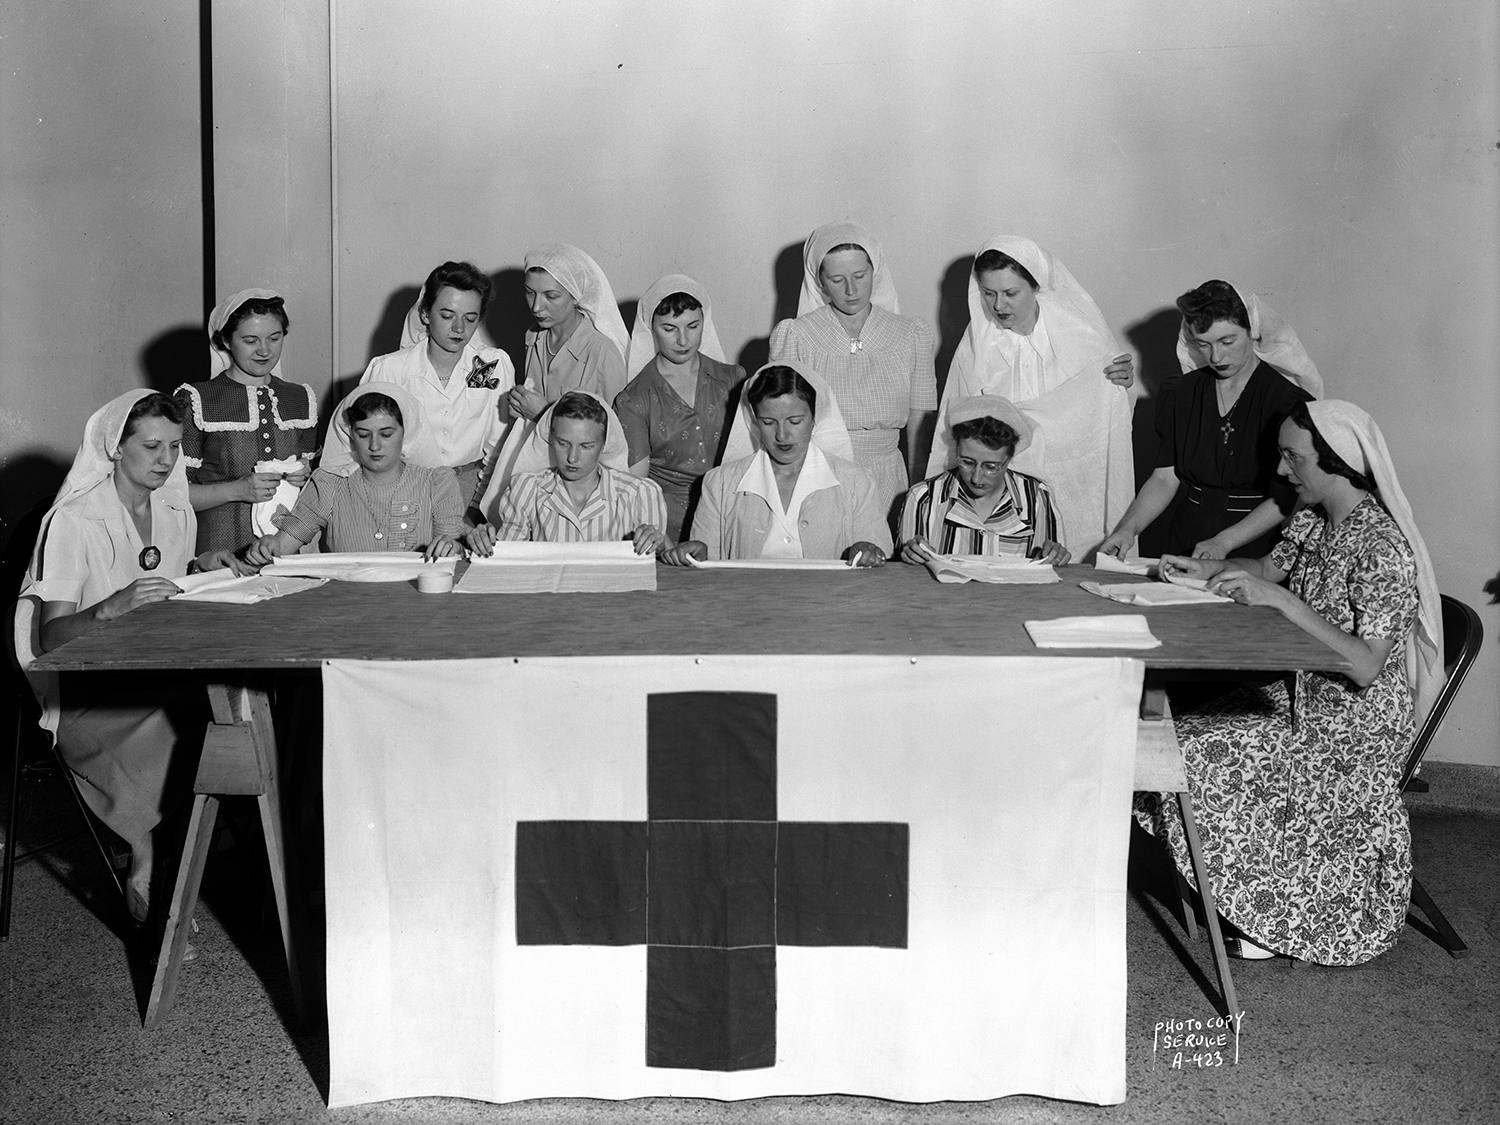 State female employees making surgical dressings / bandages for the American Red Cross in the Wisconsin State Employees Association building, 448 W Washington Avenue, Madison, Wisconsin, August 17, 1942. Seated, l to r: Marion Block, Lenore Hassett, Caroline Dagestad, Lydia Stumpf (leader), Vyrgil Tuft, and Dorothy Ryan. Standing, l to r : Lenore Brownlee, Rosaline Bee, Eulalia Fader, Eleanor DeMerse, Rosella Marshall, Zenobia Peachey and Dorothy Wilhelm.